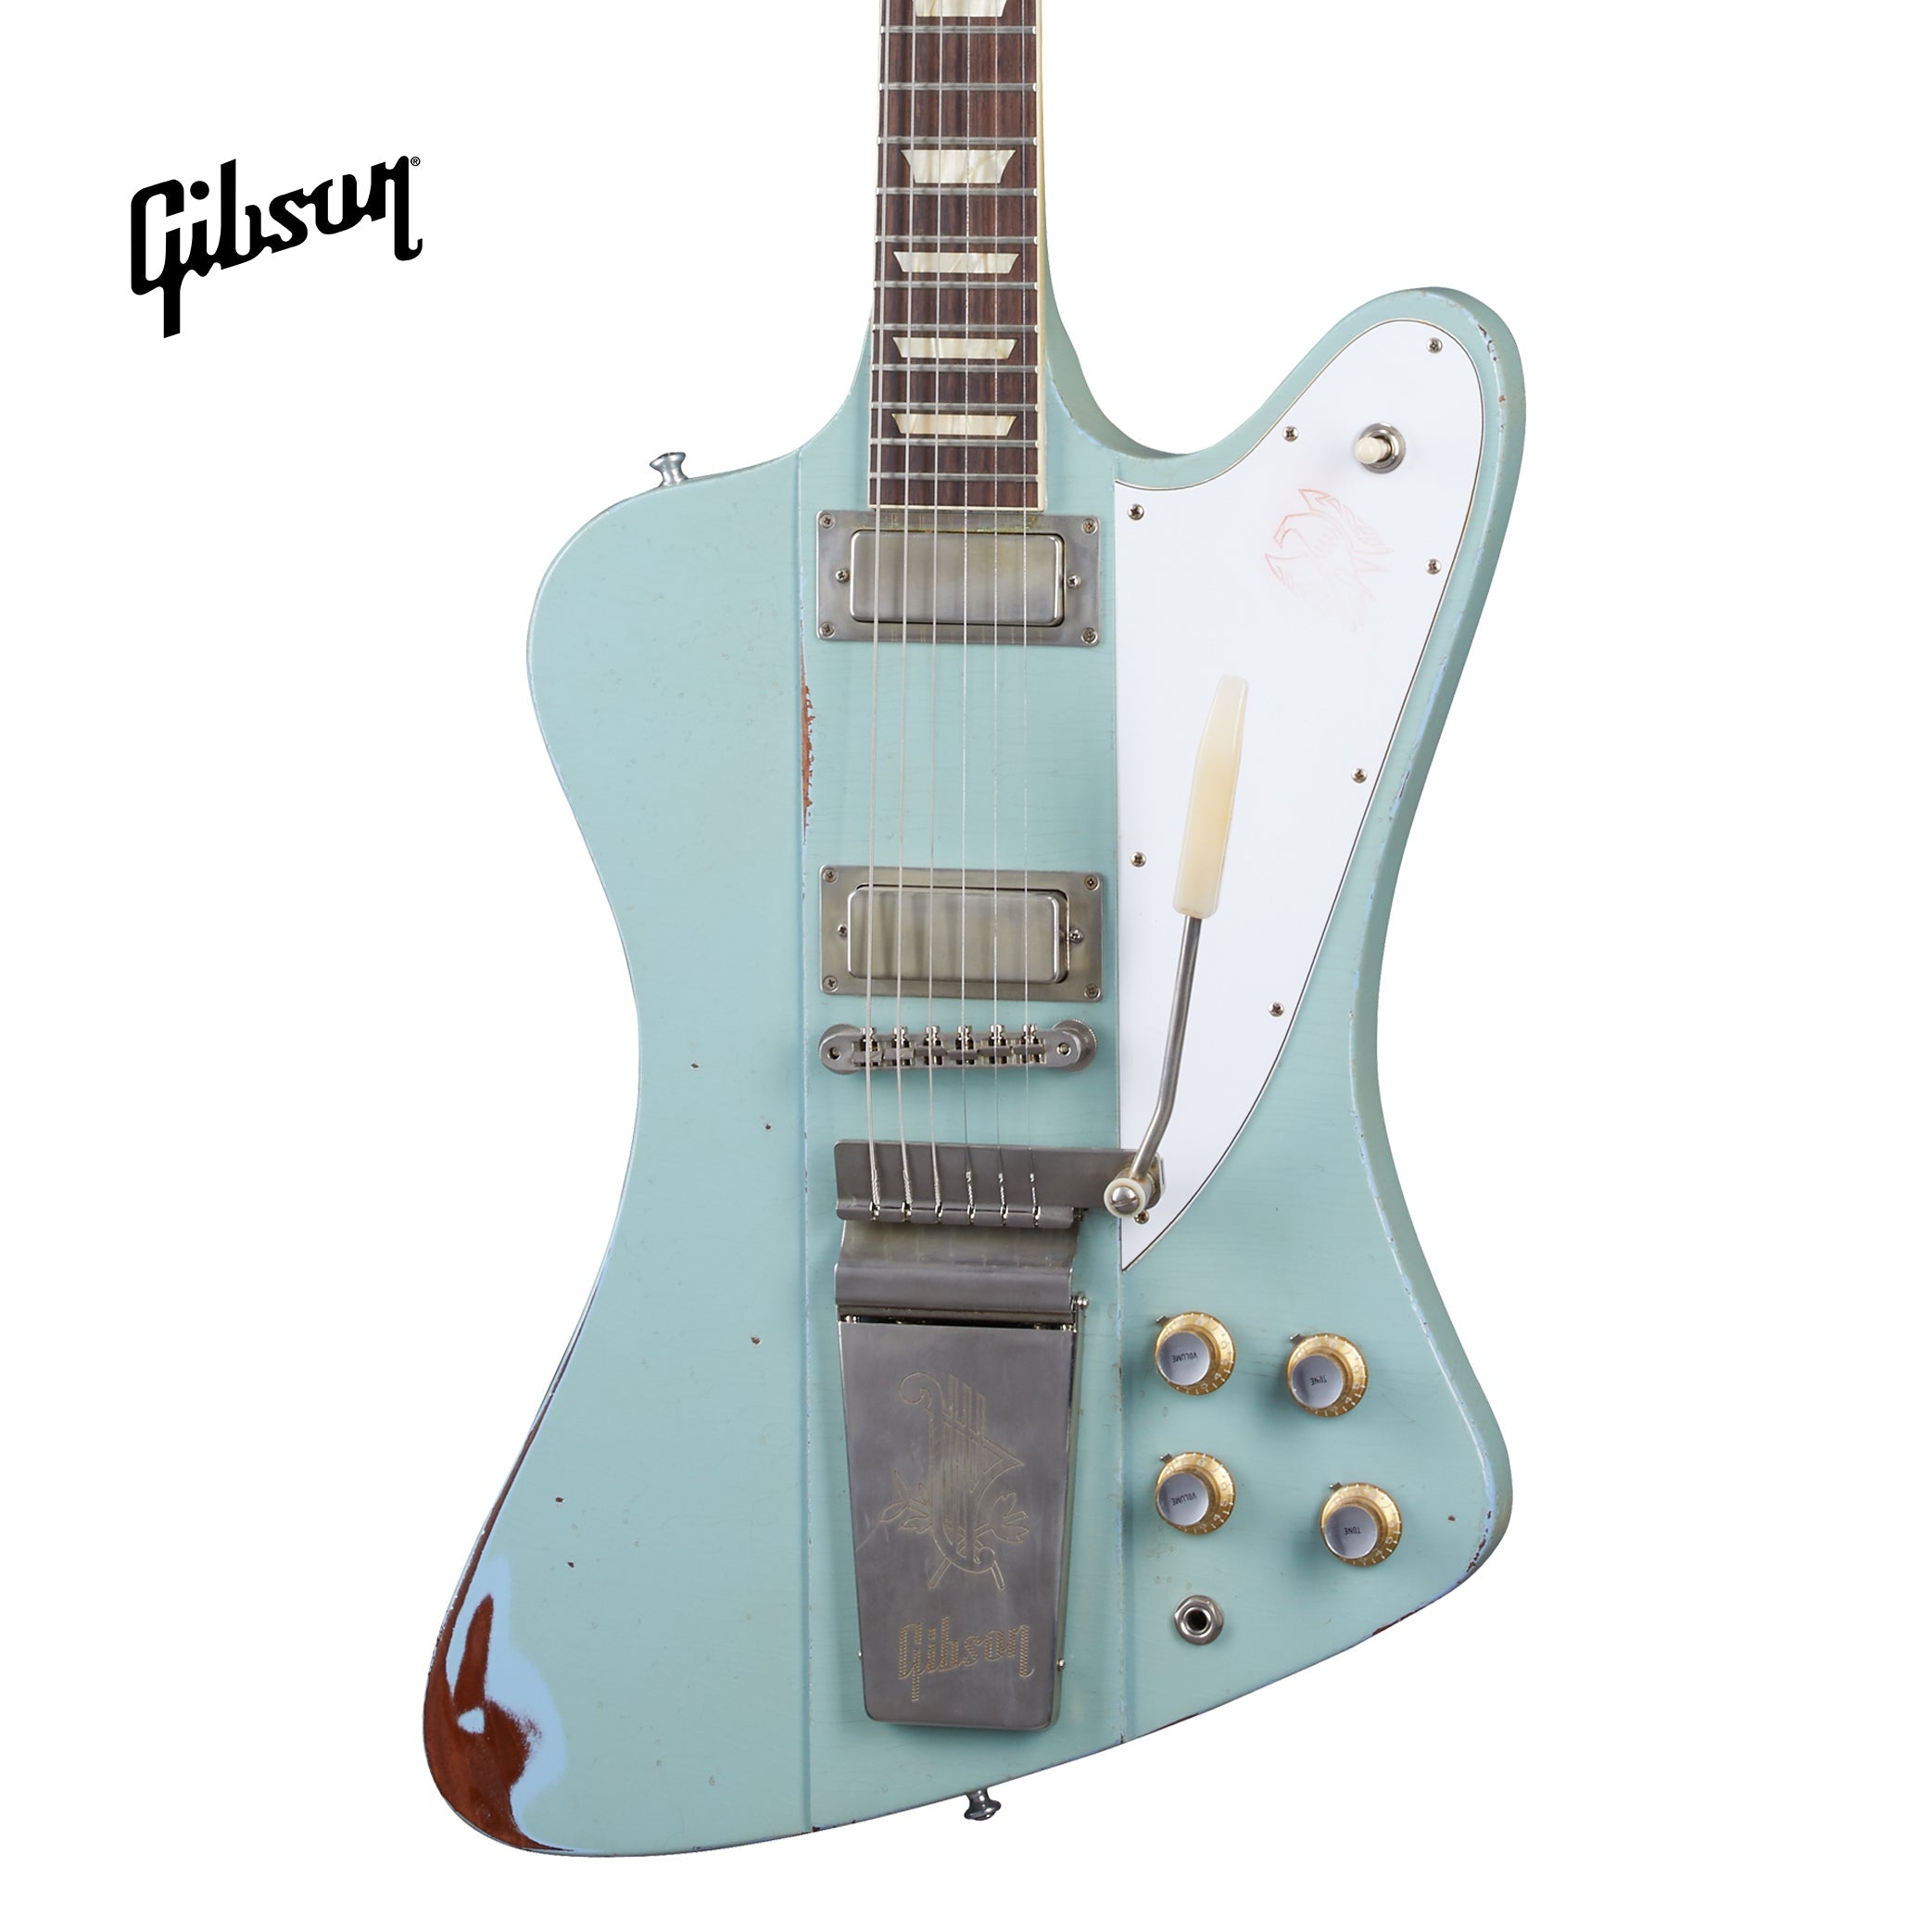 GIBSON 1963 FIREBIRD V WITH MAESTRO VIBROLA HEAVY AGED ELECTRIC GUITAR - ANTIQUE FROST BLUE